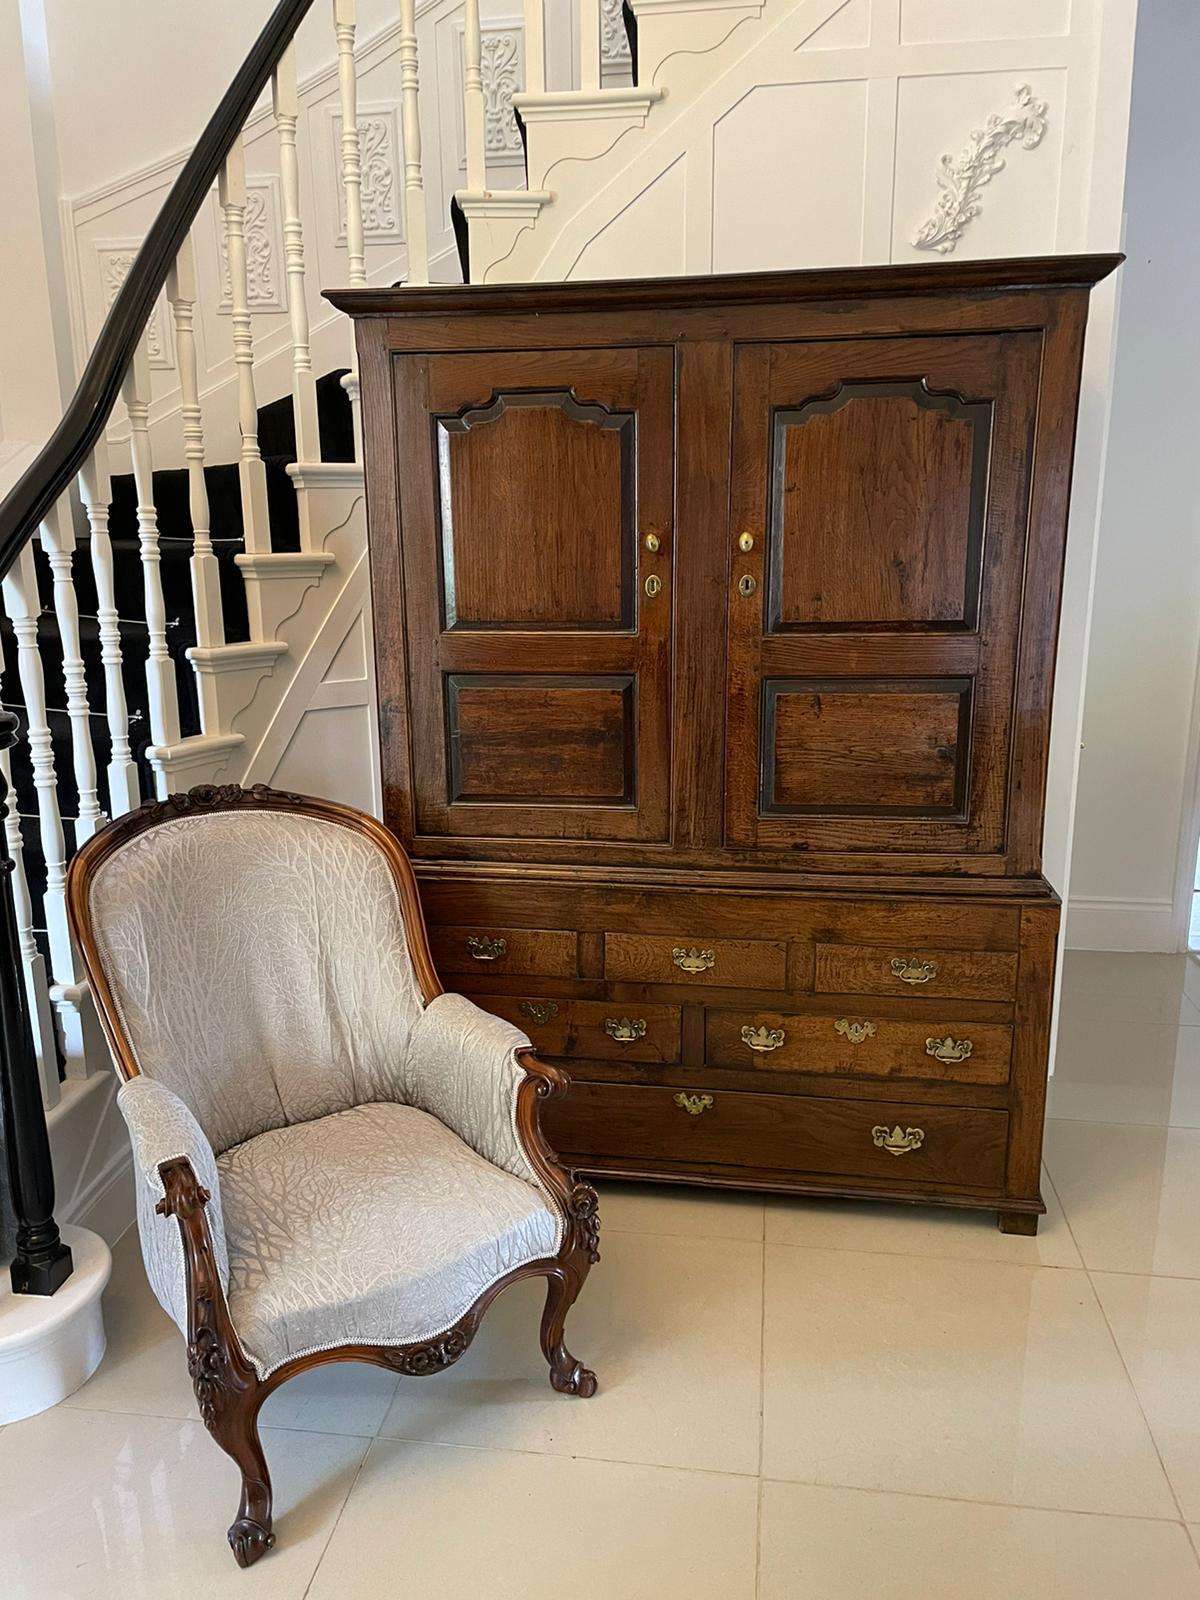 Antique George I quality oak livery cupboard having a shaped moulded cornice above a pair of quality oak fielded panelled doors opening to reveal a large storage/hanging compartment having the original turned oak pegs above five dummy drawers 1 long